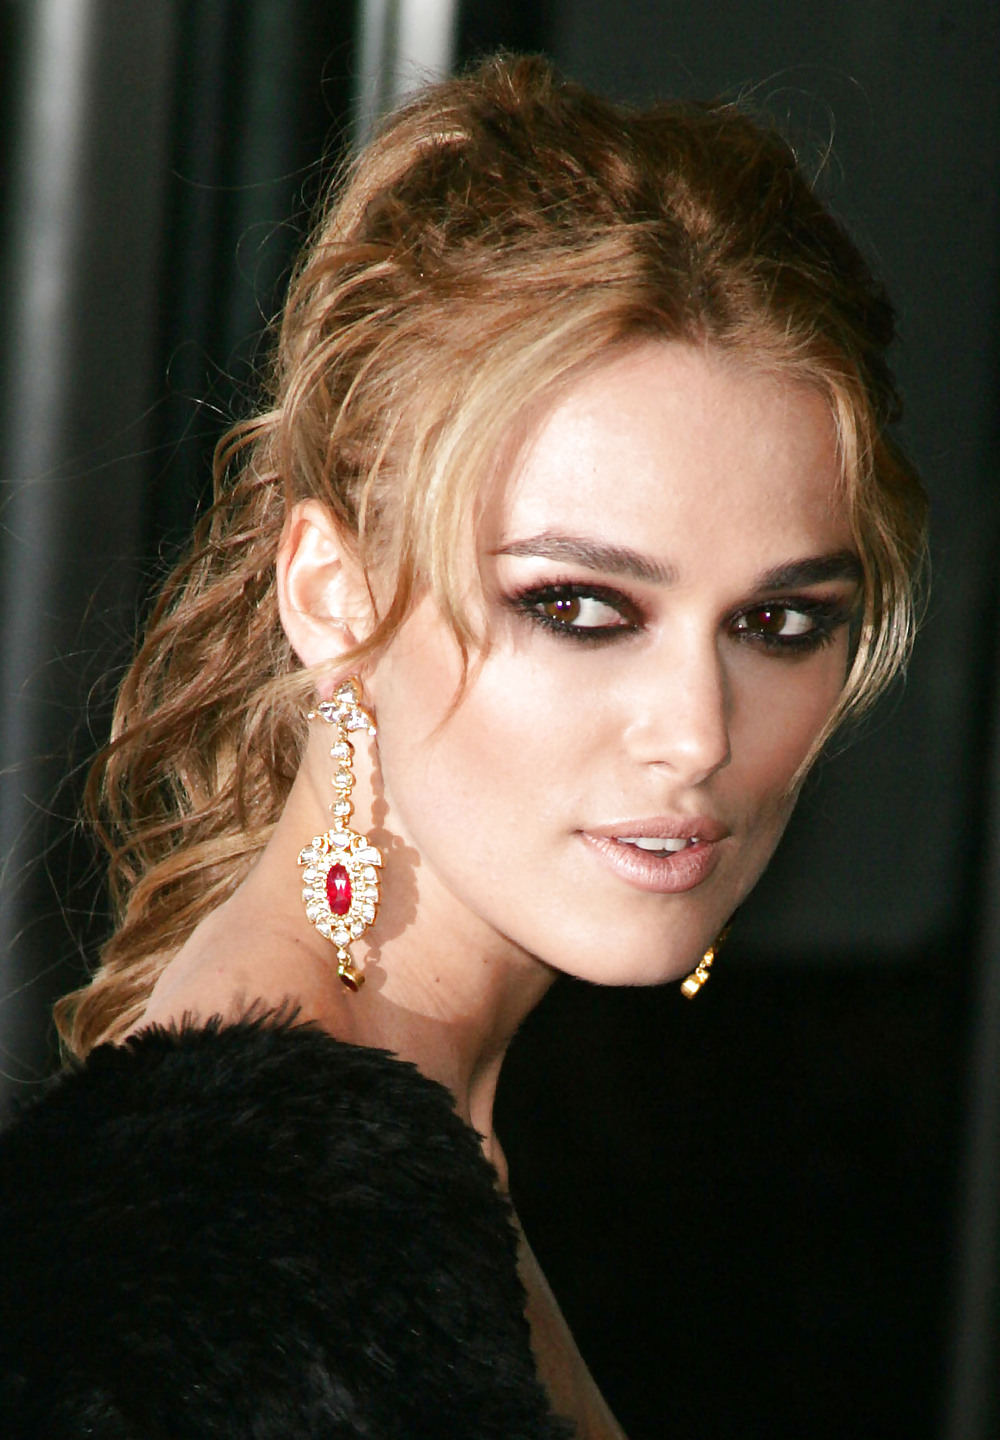 Keira Knightley The Royal Lady of England #35650435